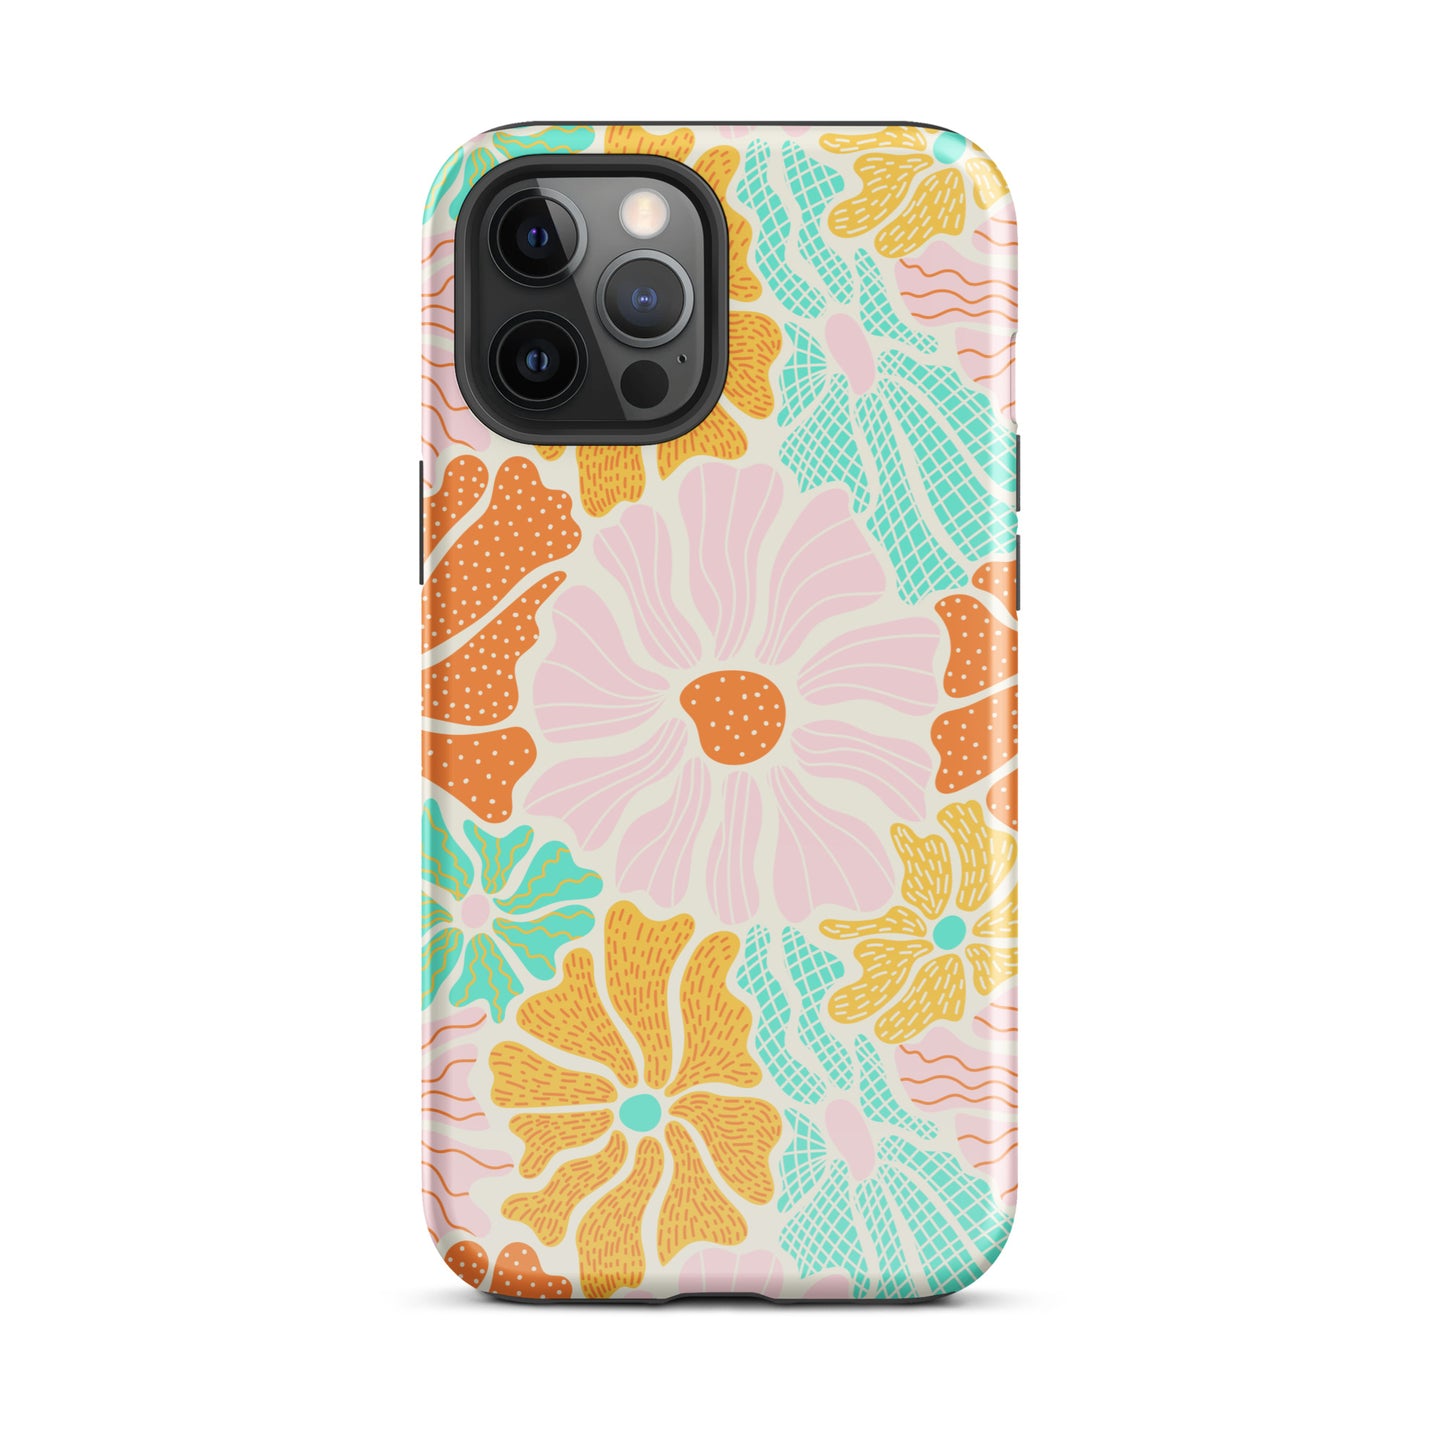 Neon Garden iPhone Case iPhone 12 Pro Max Glossy